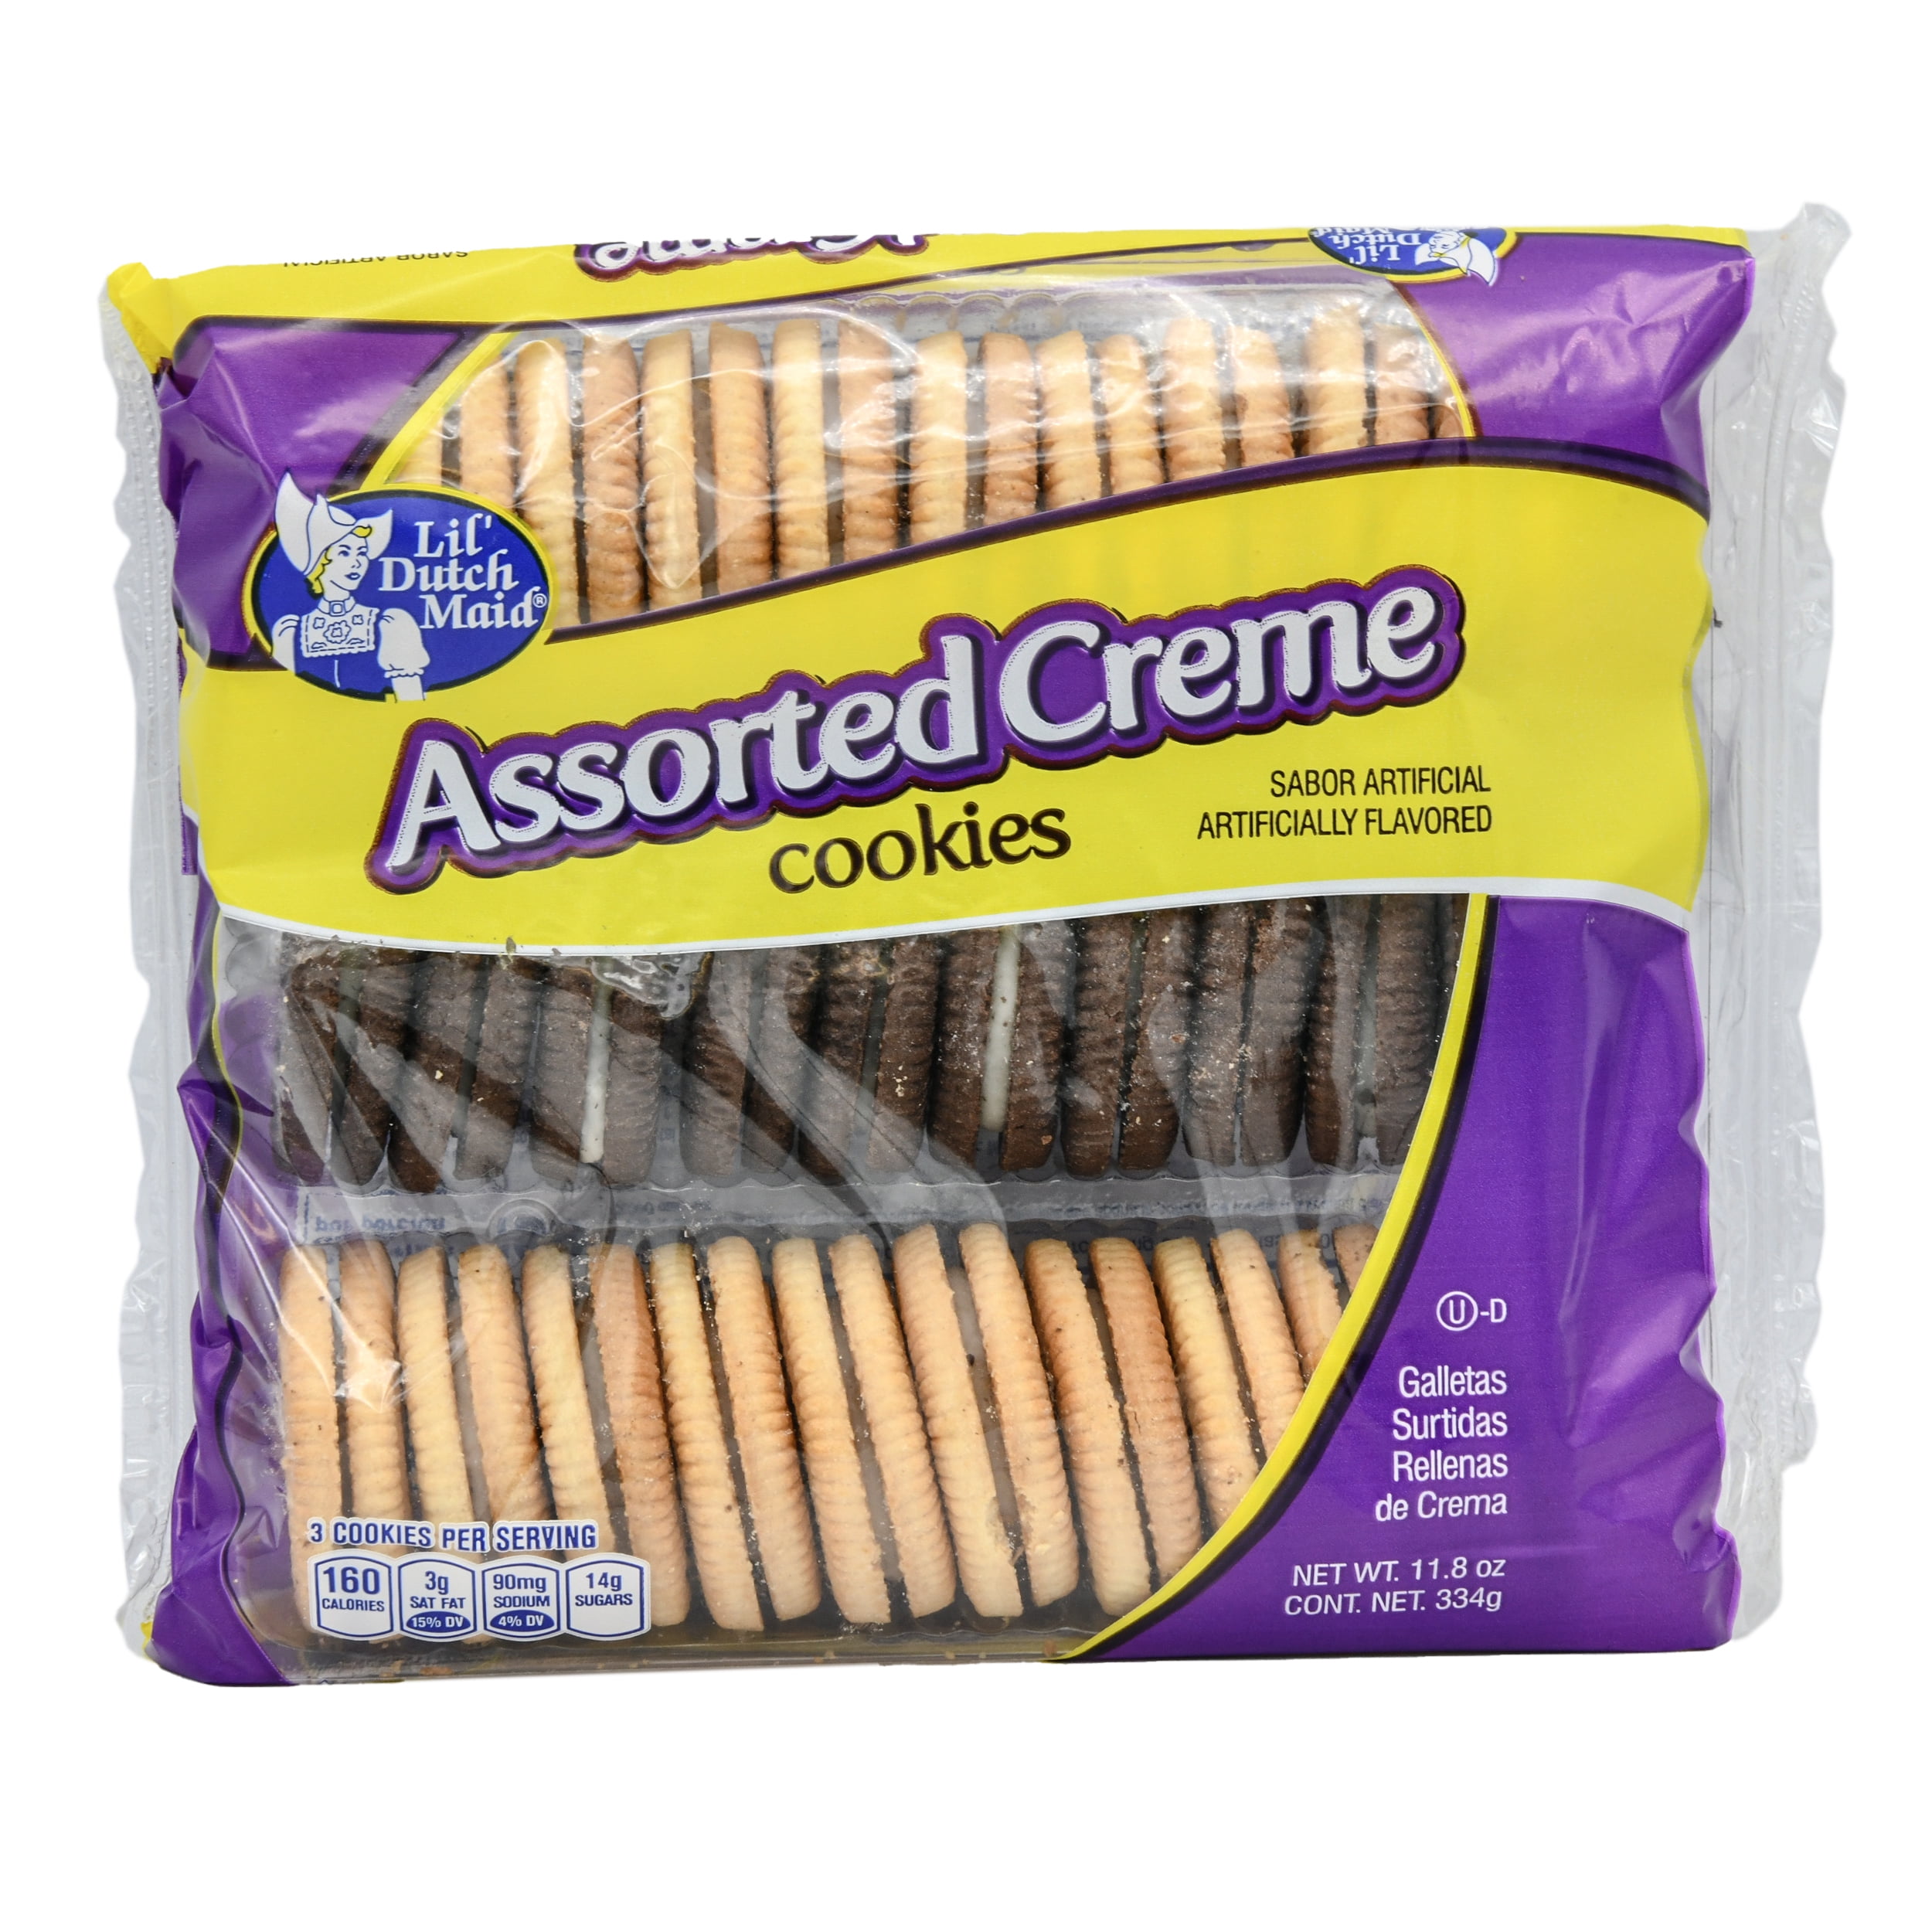 Little Dutch Maid Assorted Creme Filled Cookies 11.8 oz.